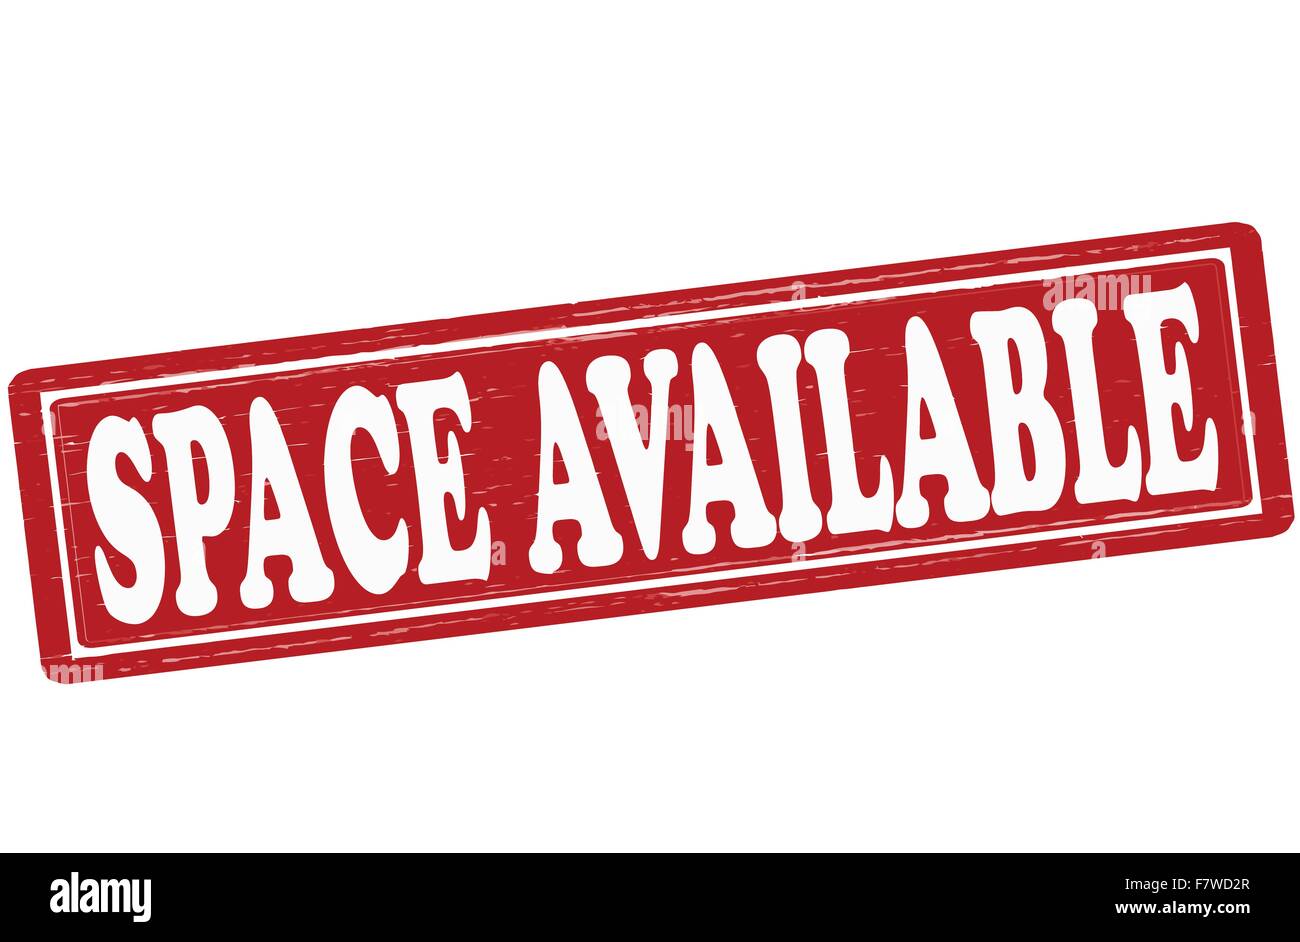 Space available Stock Vector